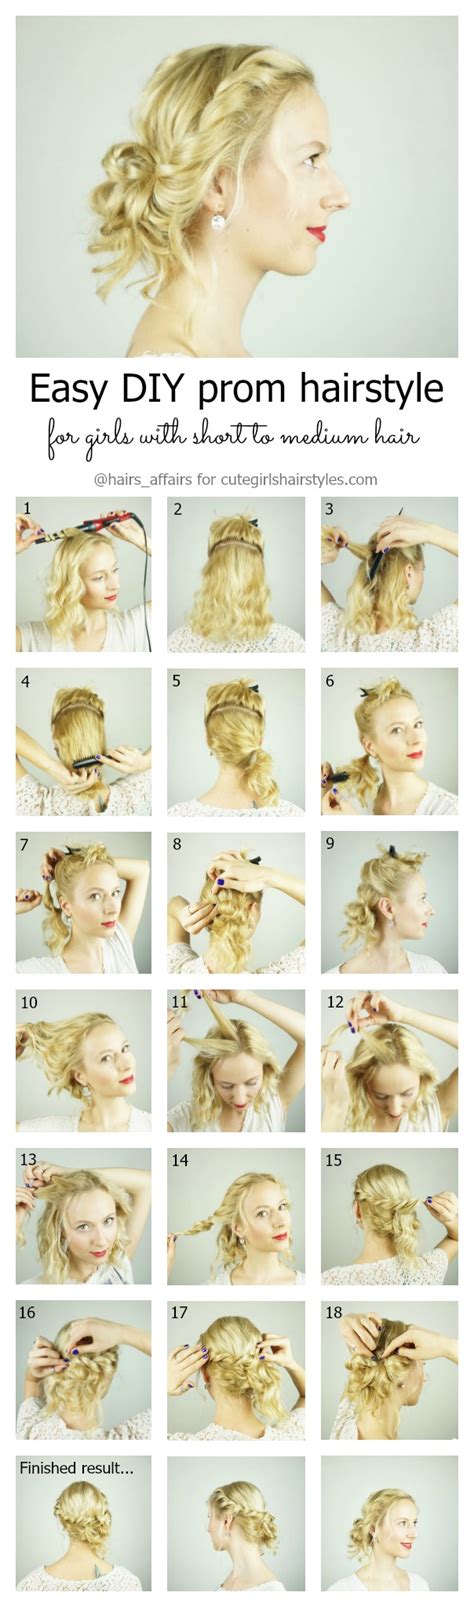 Prom Hairstyles Step By Step Instructions Photos